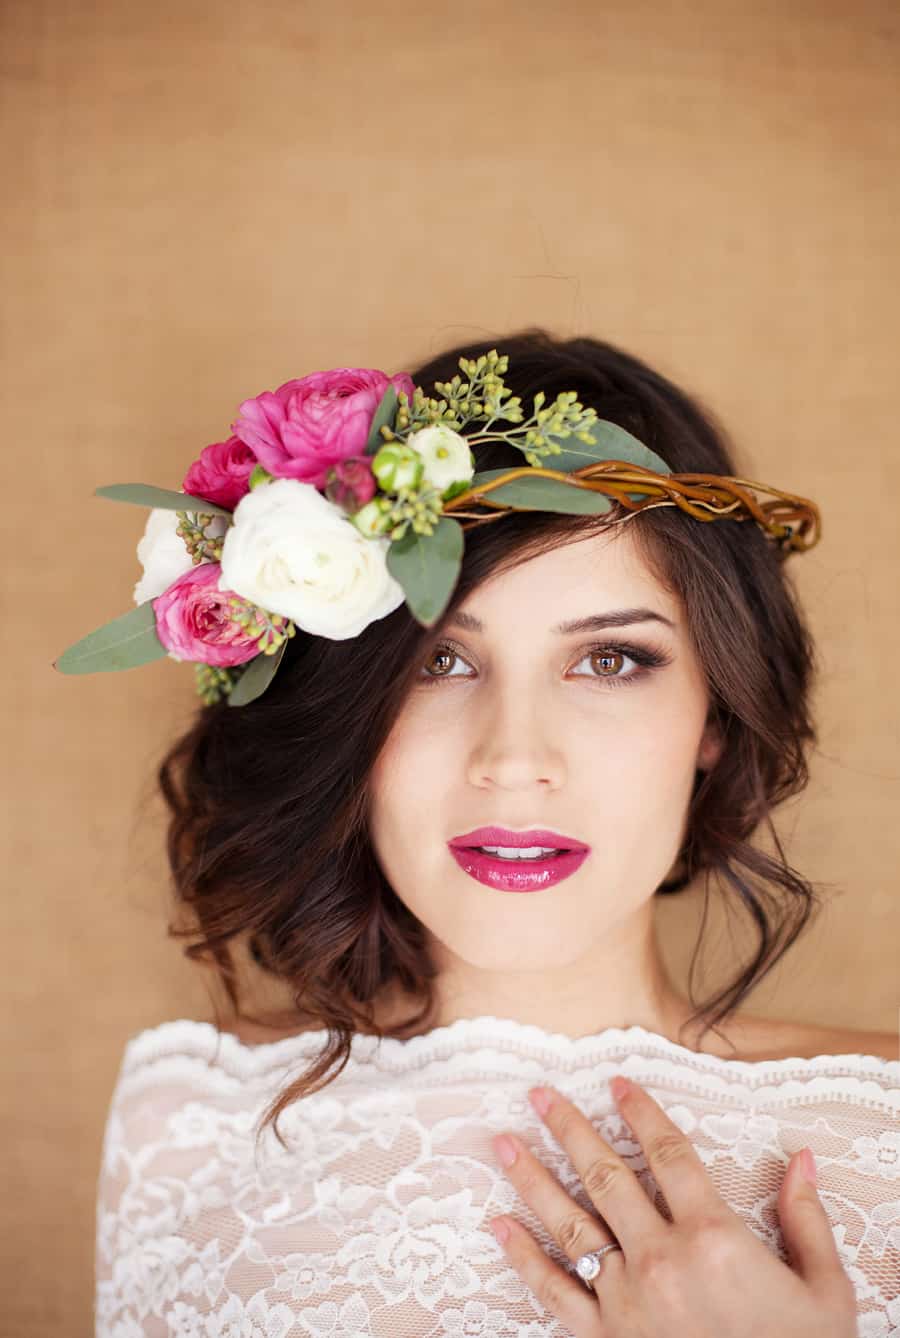 Gorgeous Flower Crown for Your Boho Wedding Floral Wedding Inspiration Amber Weimer Janae Frazer Kat Frazier Hair and Makeup by Steph